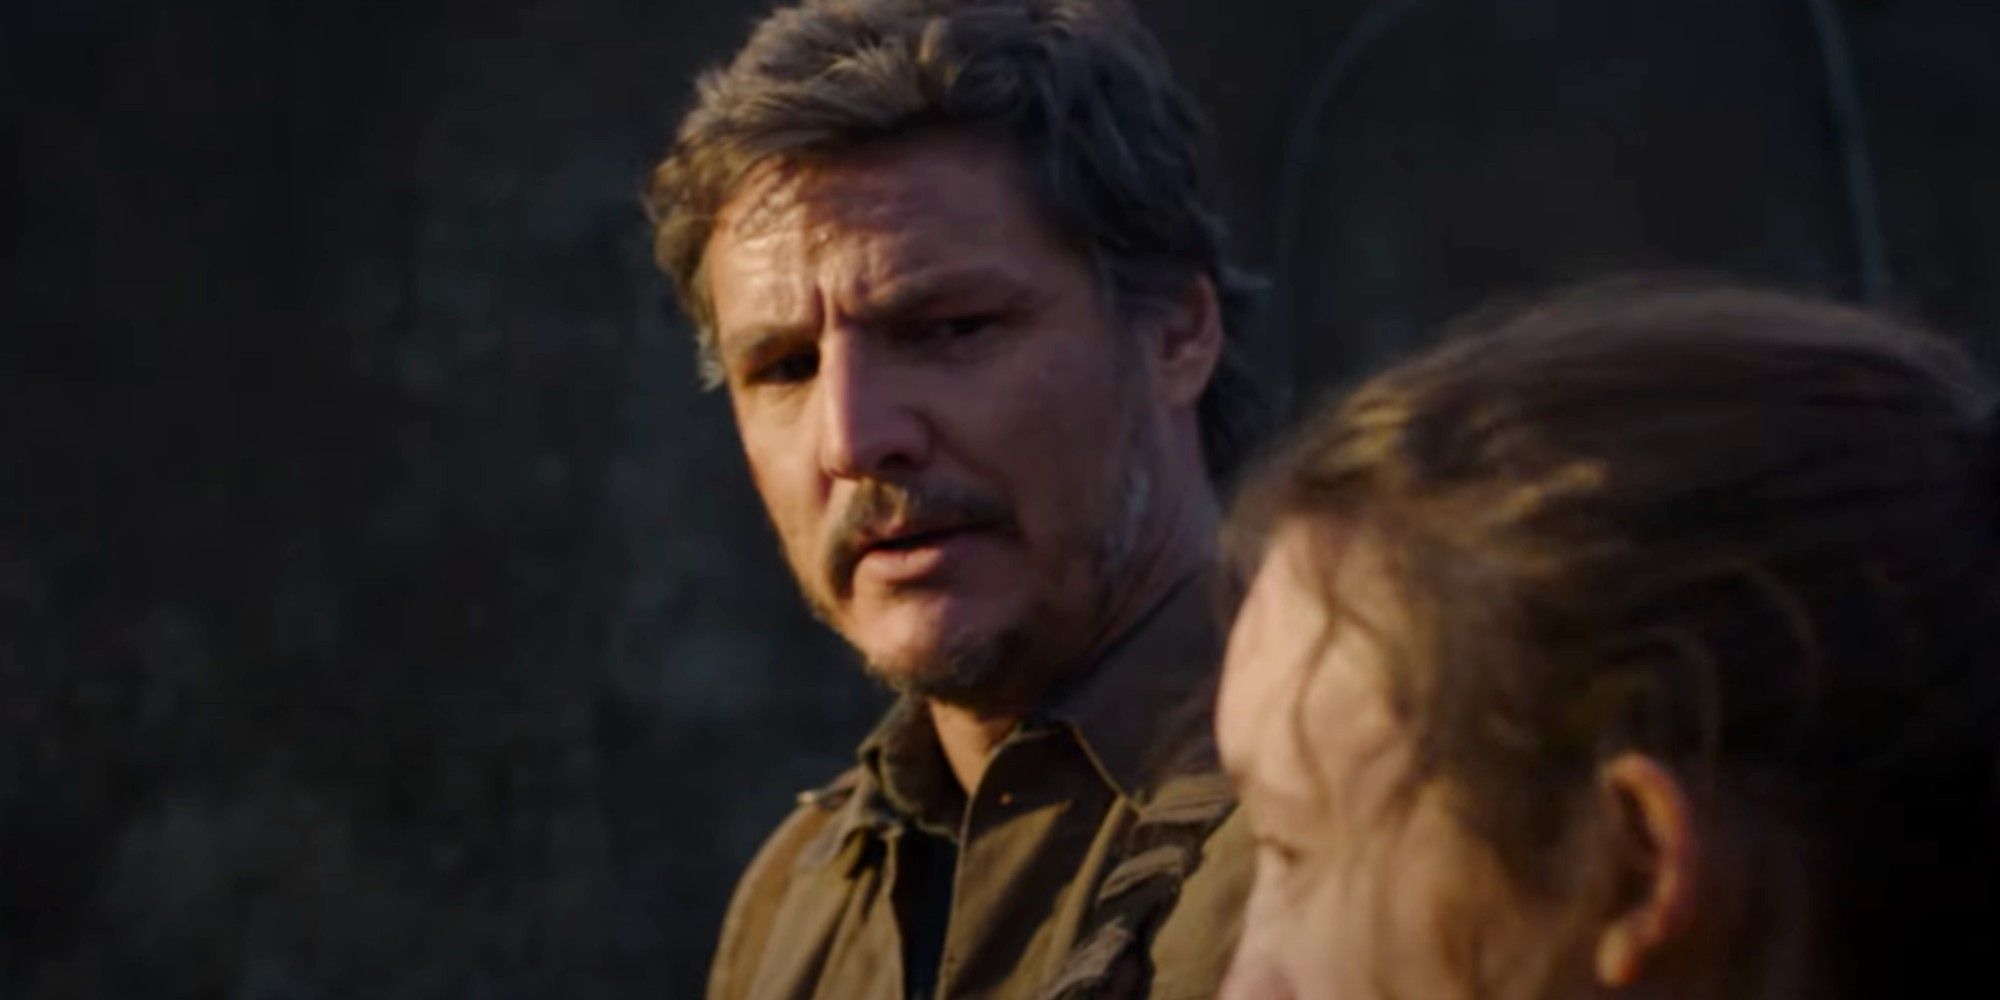 HBO The Last of Us Pedro Pascal and Bella Ramsey as Joel Miller and Ellie Williams